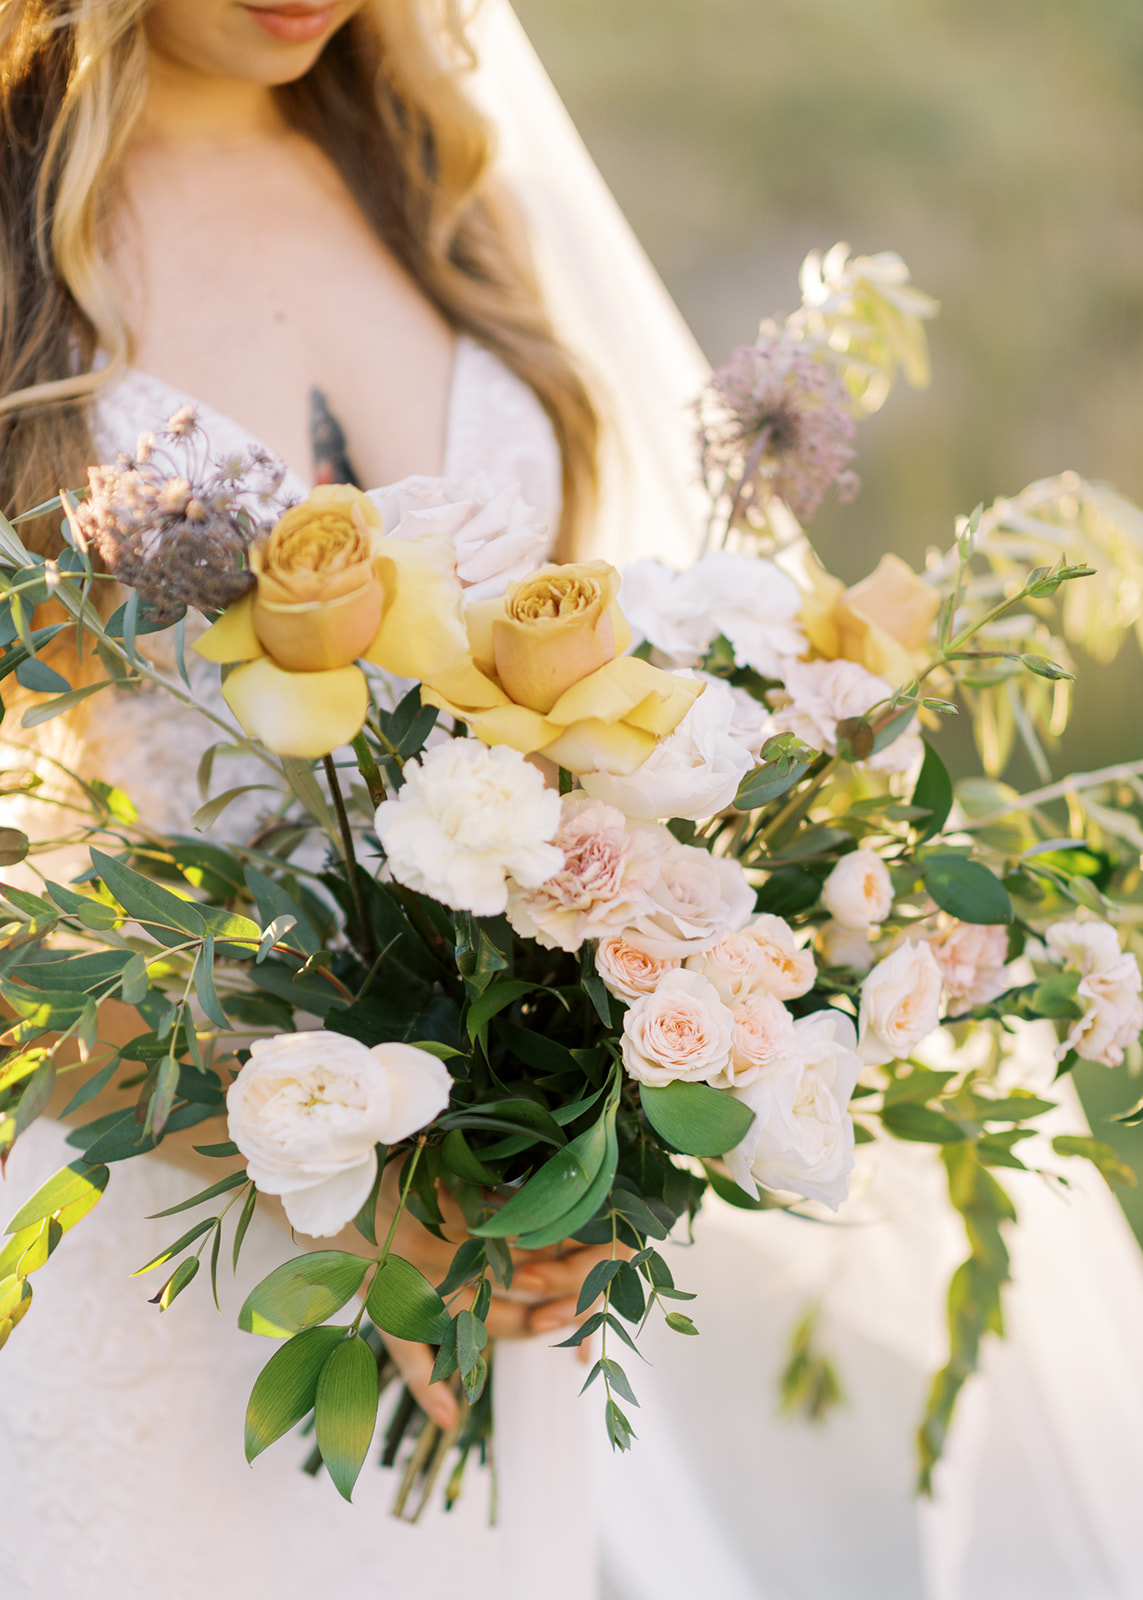 Golden roses in a nature inspired wedding boquet